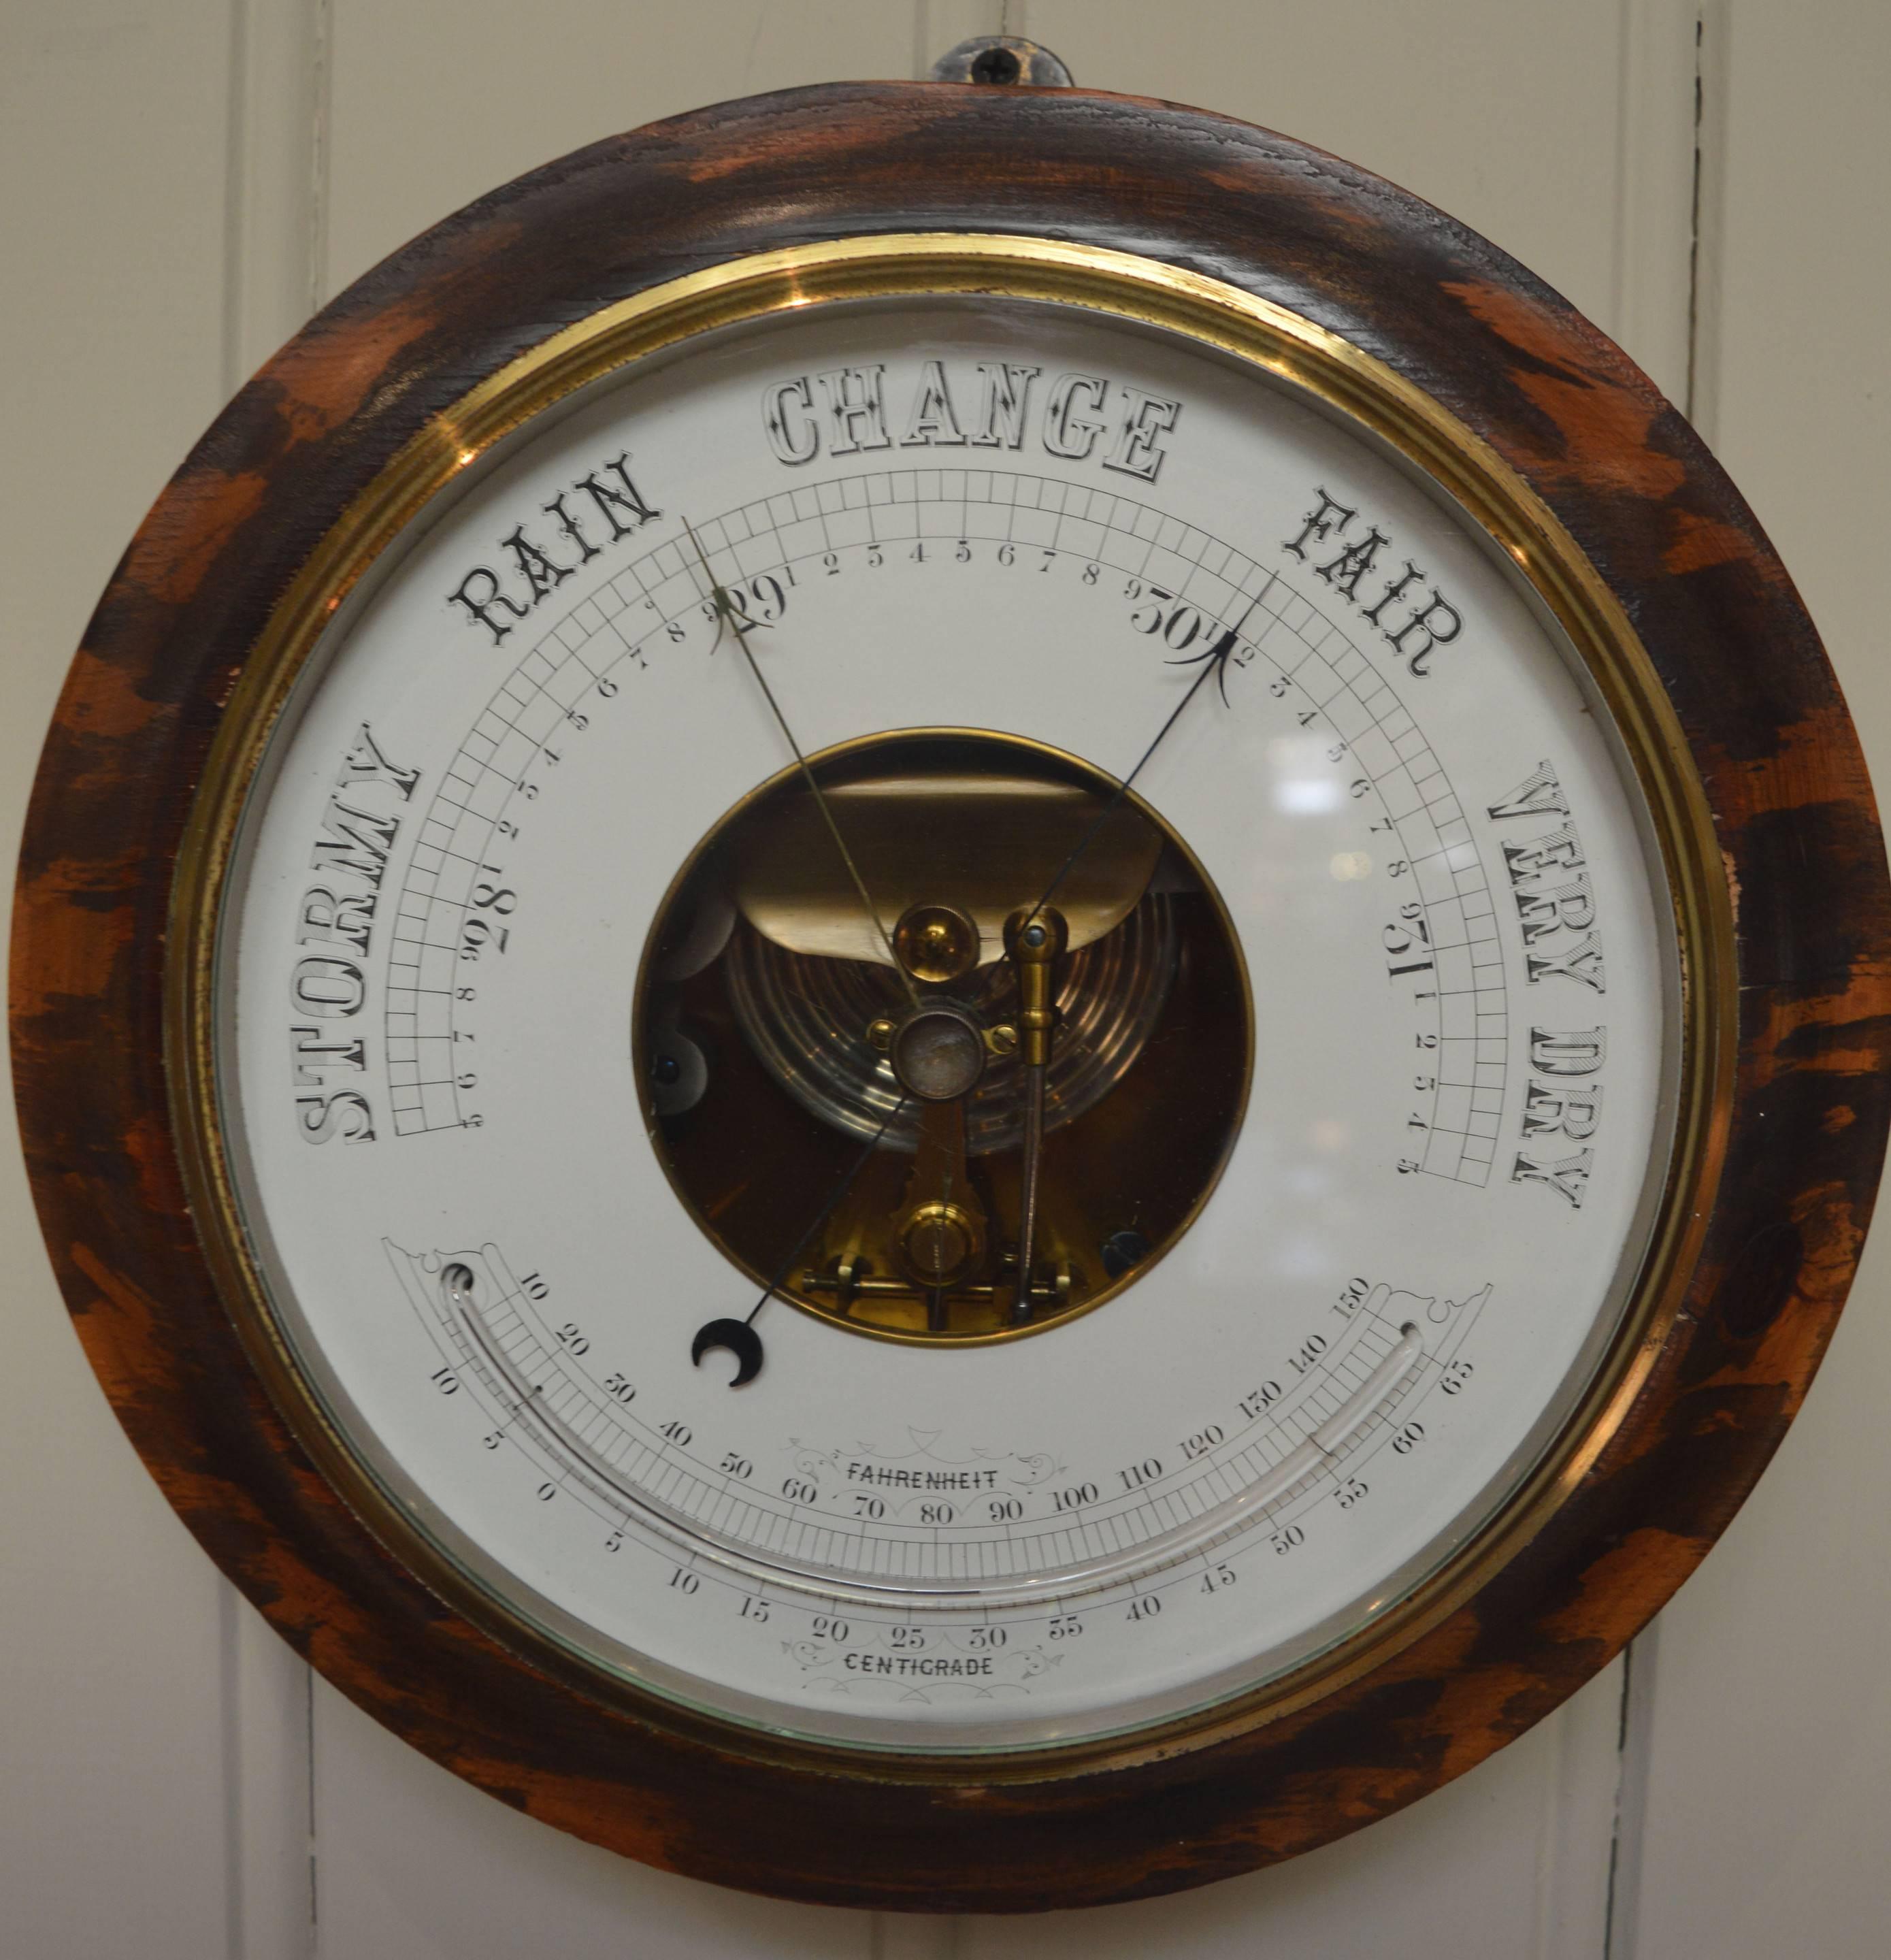 A large grained fruitwood aneroid barometer. It has a heavy solid fruitwood case, with a stepped edge and a grained finish. The brass bezel has a thick bevel edge glass, behind which is a white dial showing the atmospheric pressure and a curved